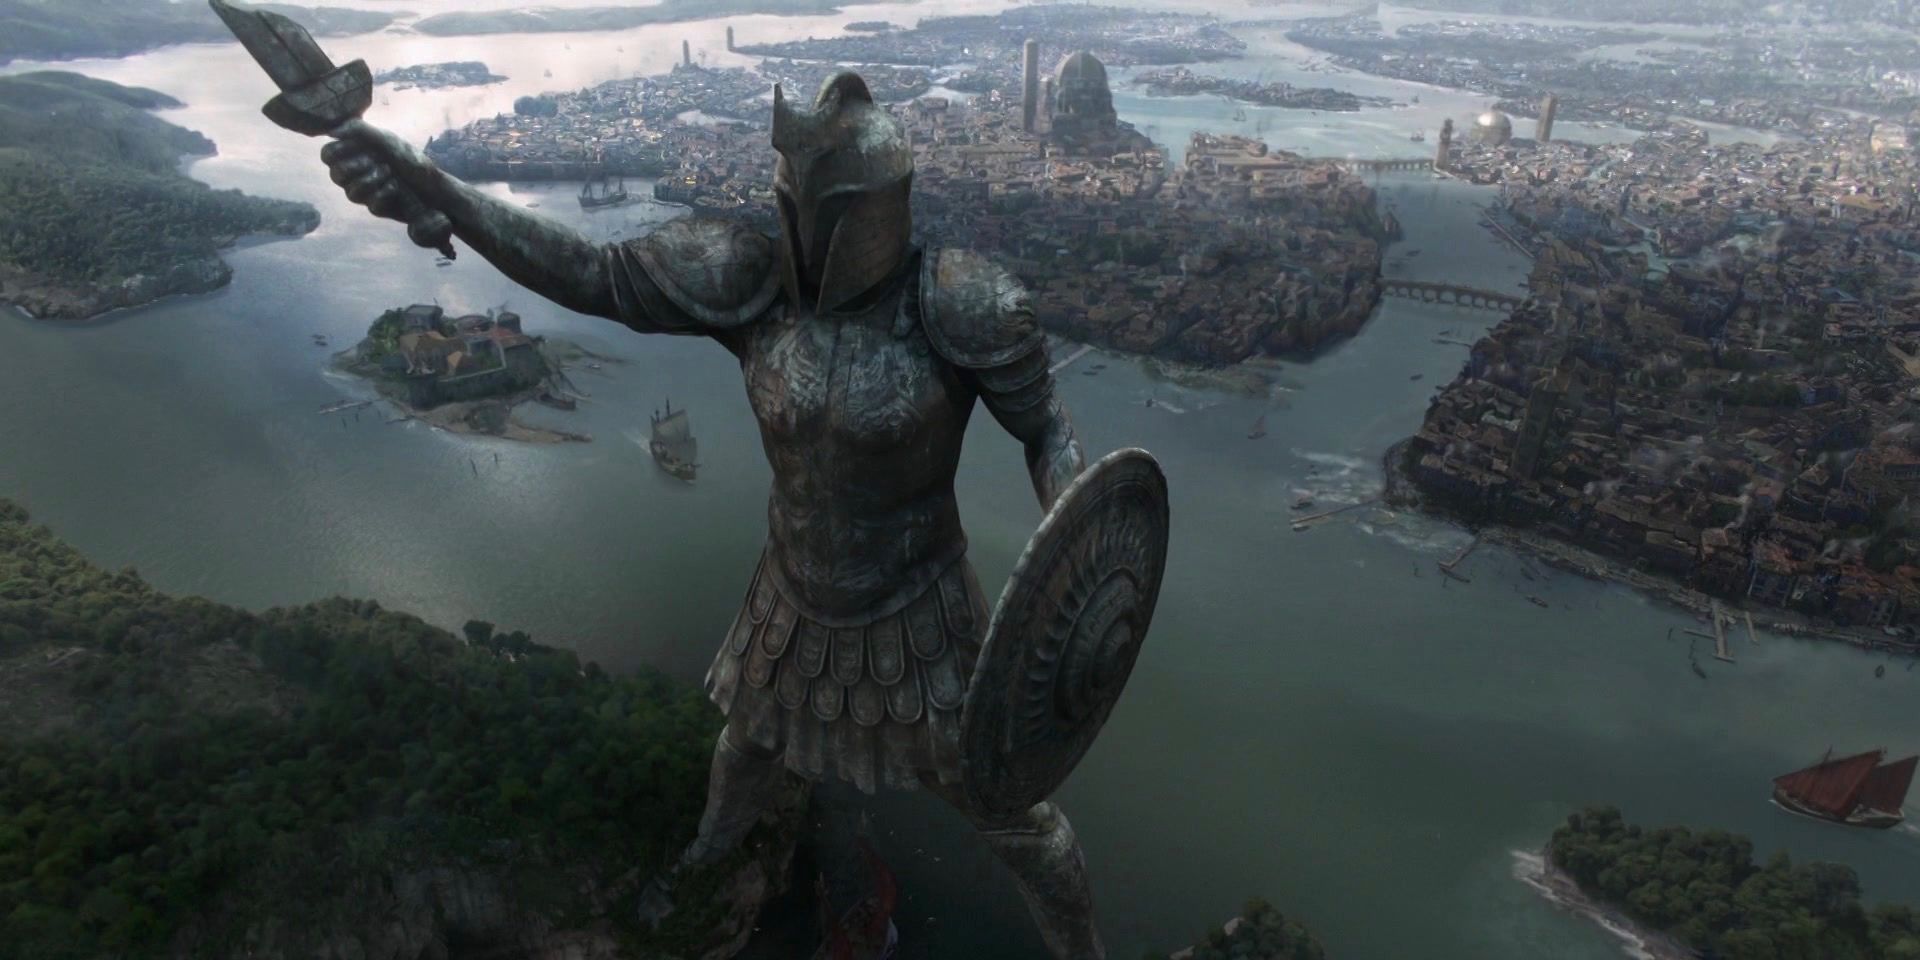 An aerial view of the Titan of Braavos in Game of Thrones